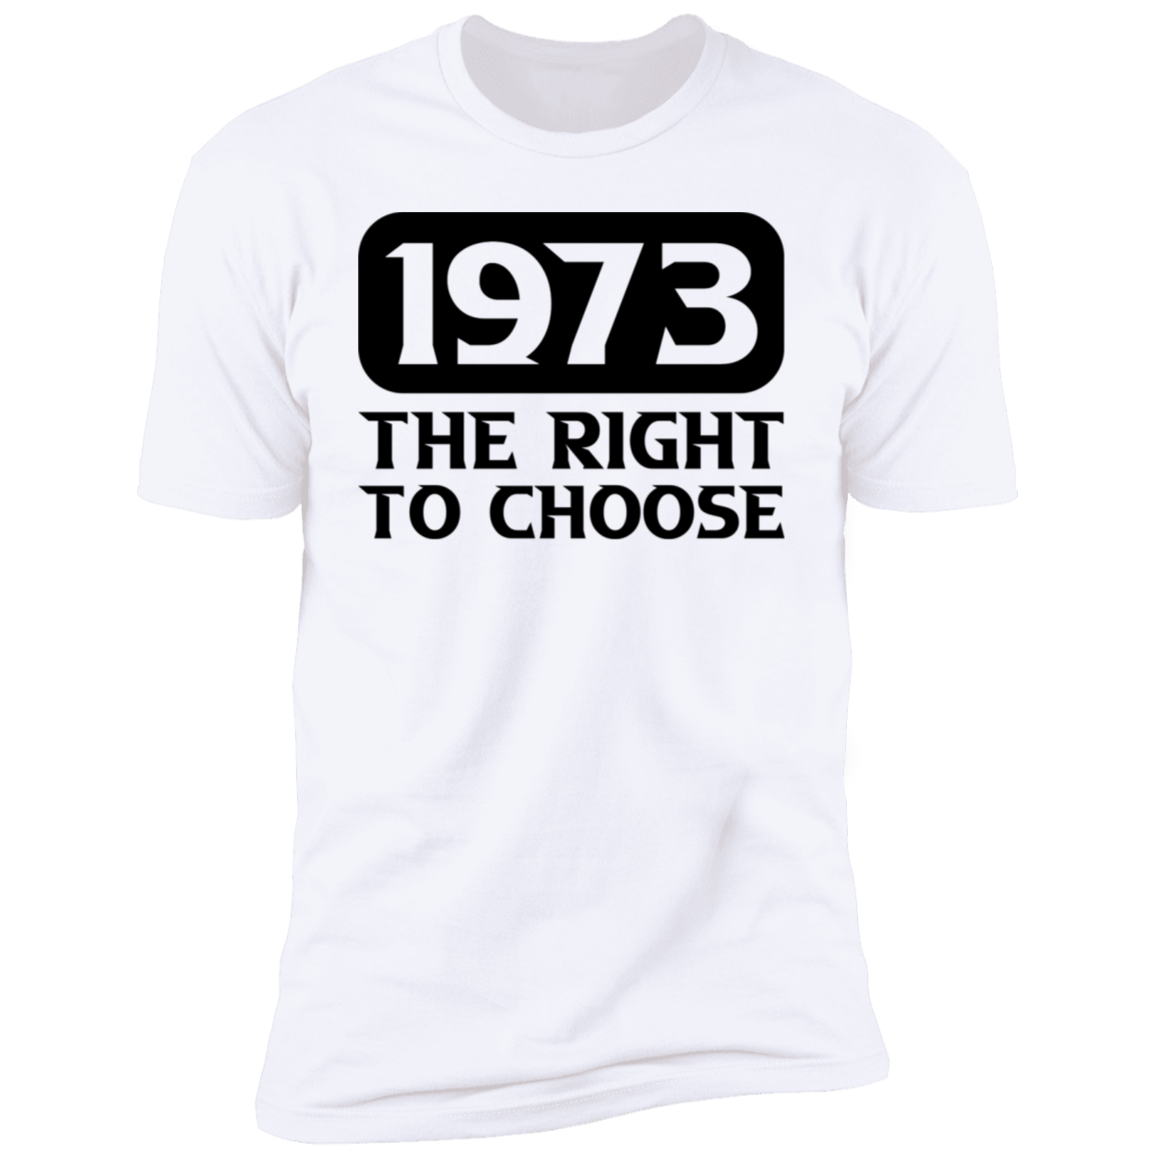 1973 The Right To Choose Unisex T-Shirt